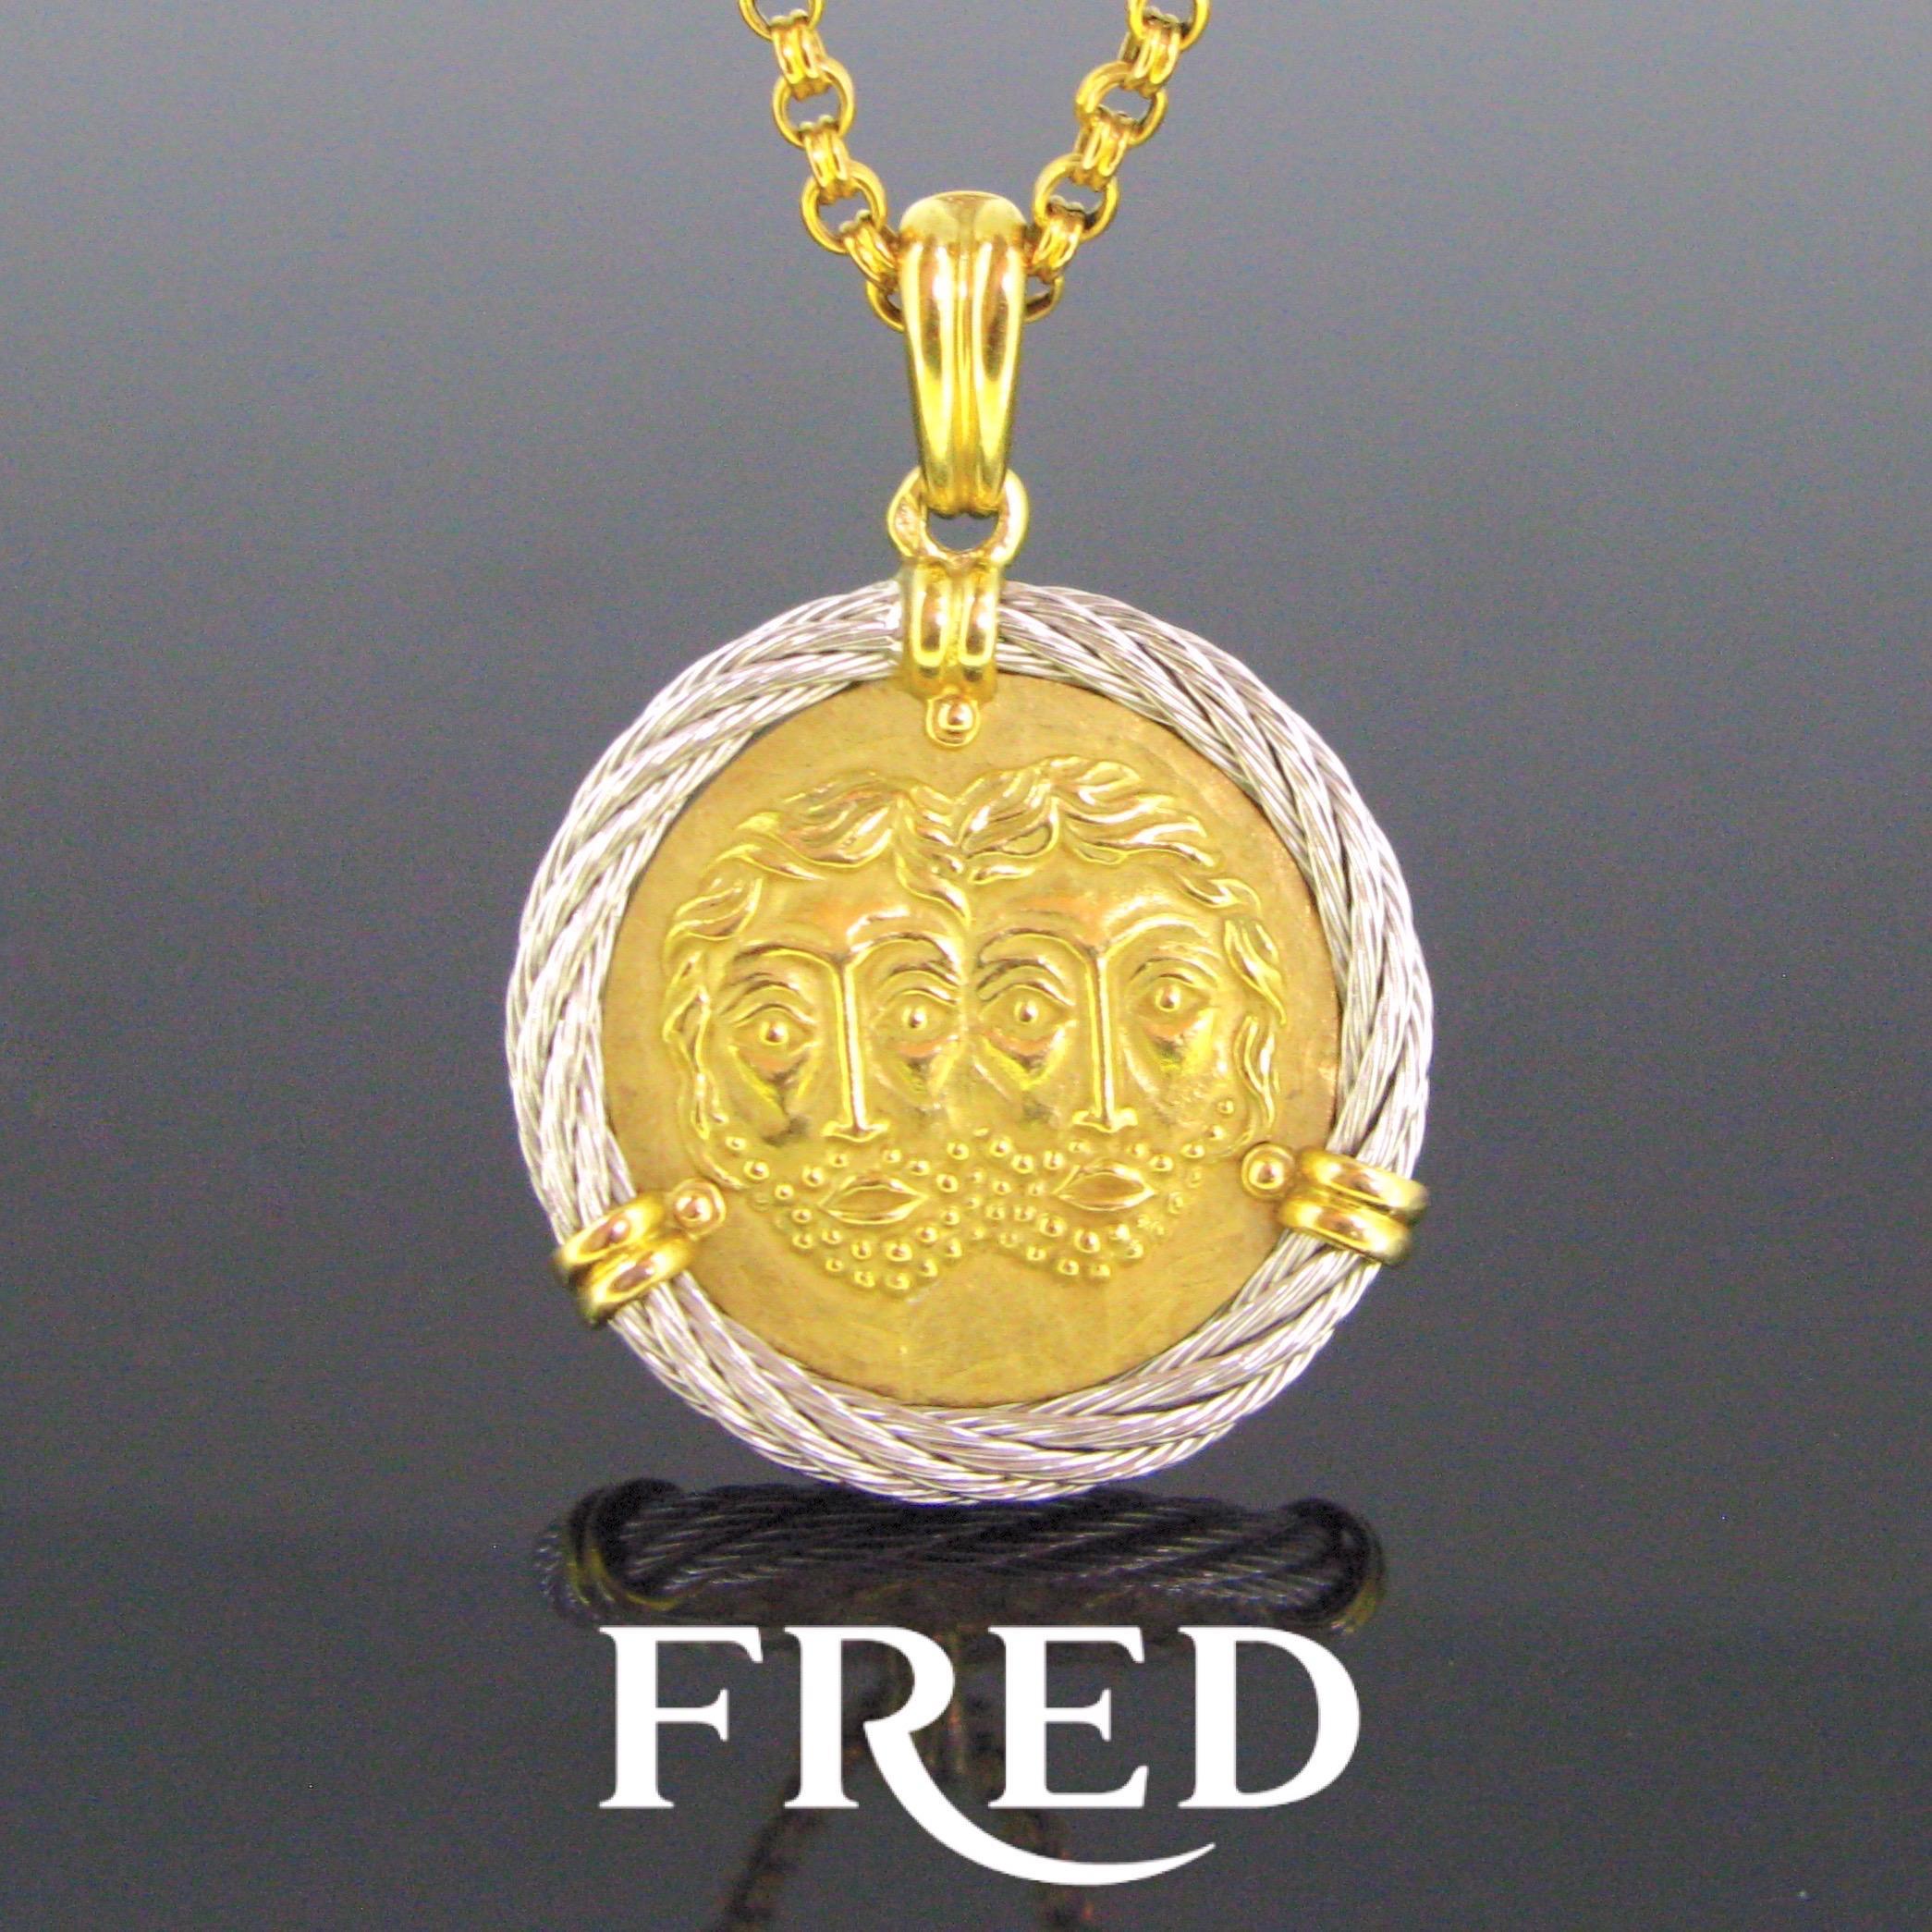 Weight:	18.8


Metal:	18kt yellow Gold 


Signature:	Fred Paris
	

Condition:	Very Good


Hallmarks:	French – eagle’s head
	

Comments:	This pendant is from the Force 10 Collection by Fred. It is the Gemini zodiac sign; it is made in 18kt gold and